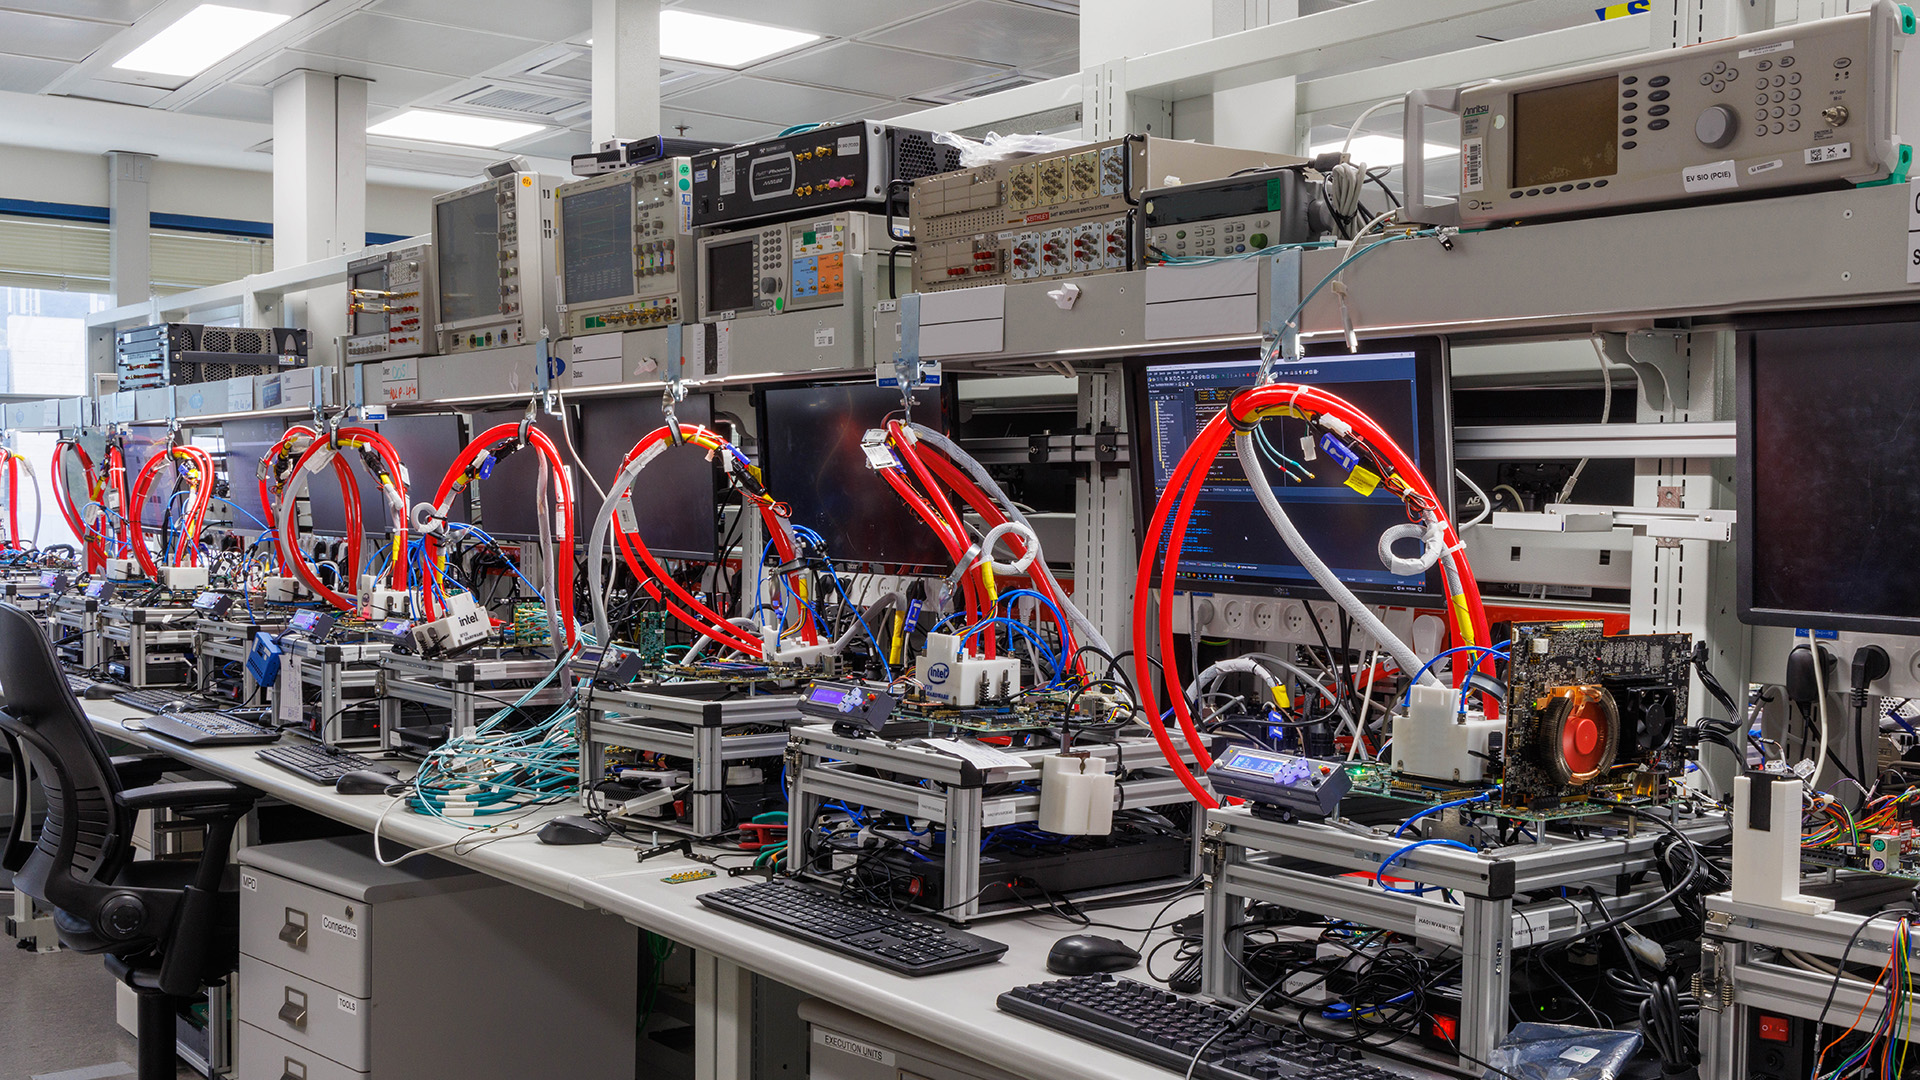 Lines of test benches for testing chips at Intel's IDC lab.